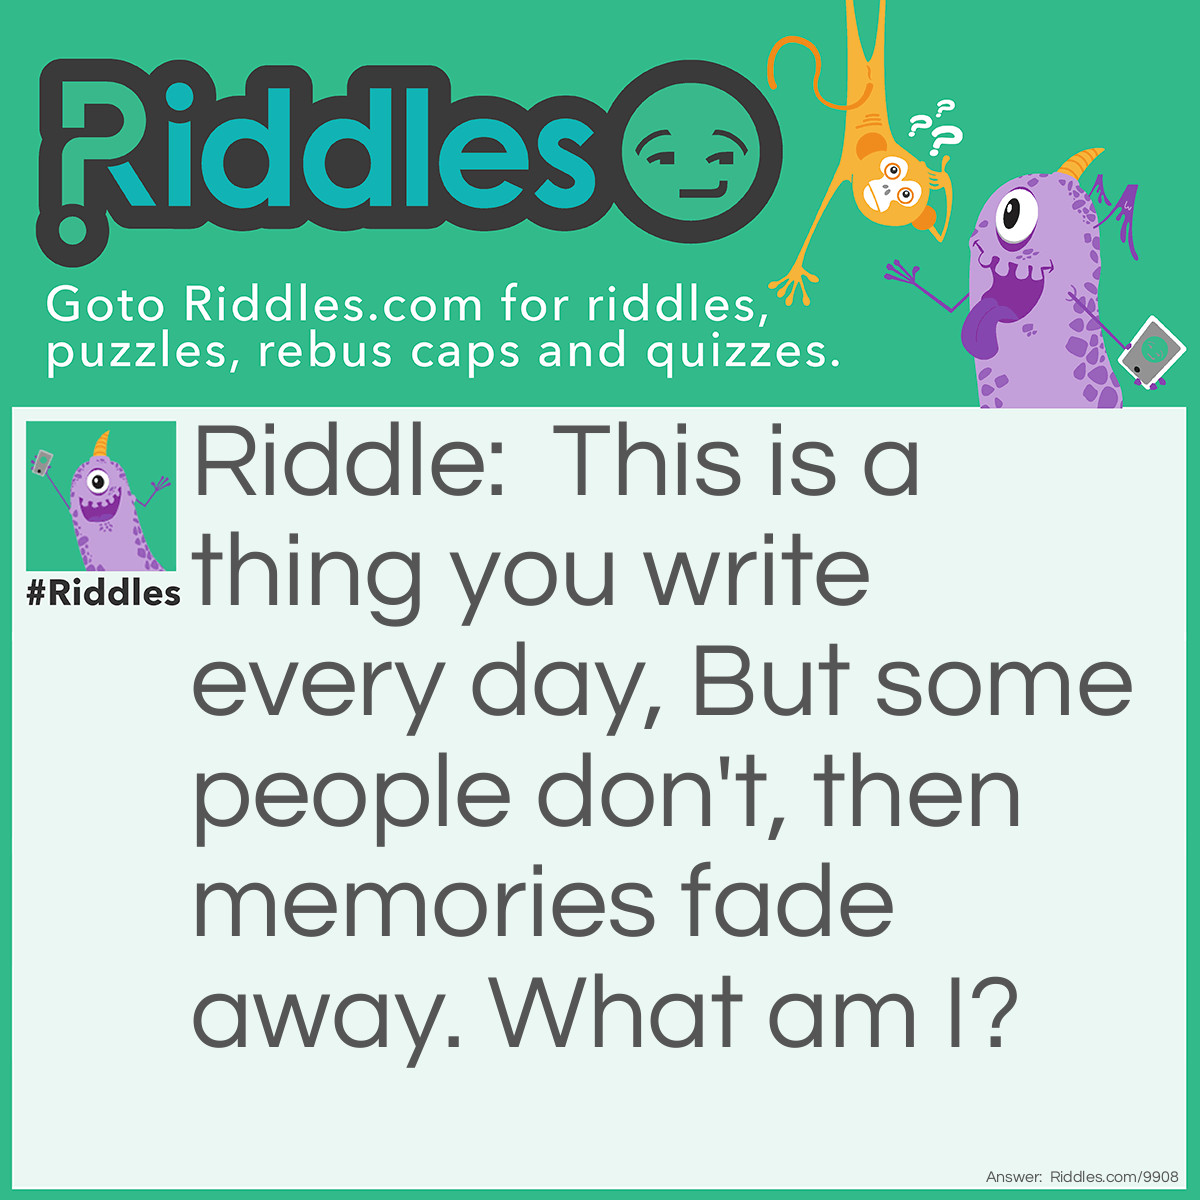 Riddle: This is a thing you write every day, But some people don't, then memories fade away. What am I? Answer: A diary.